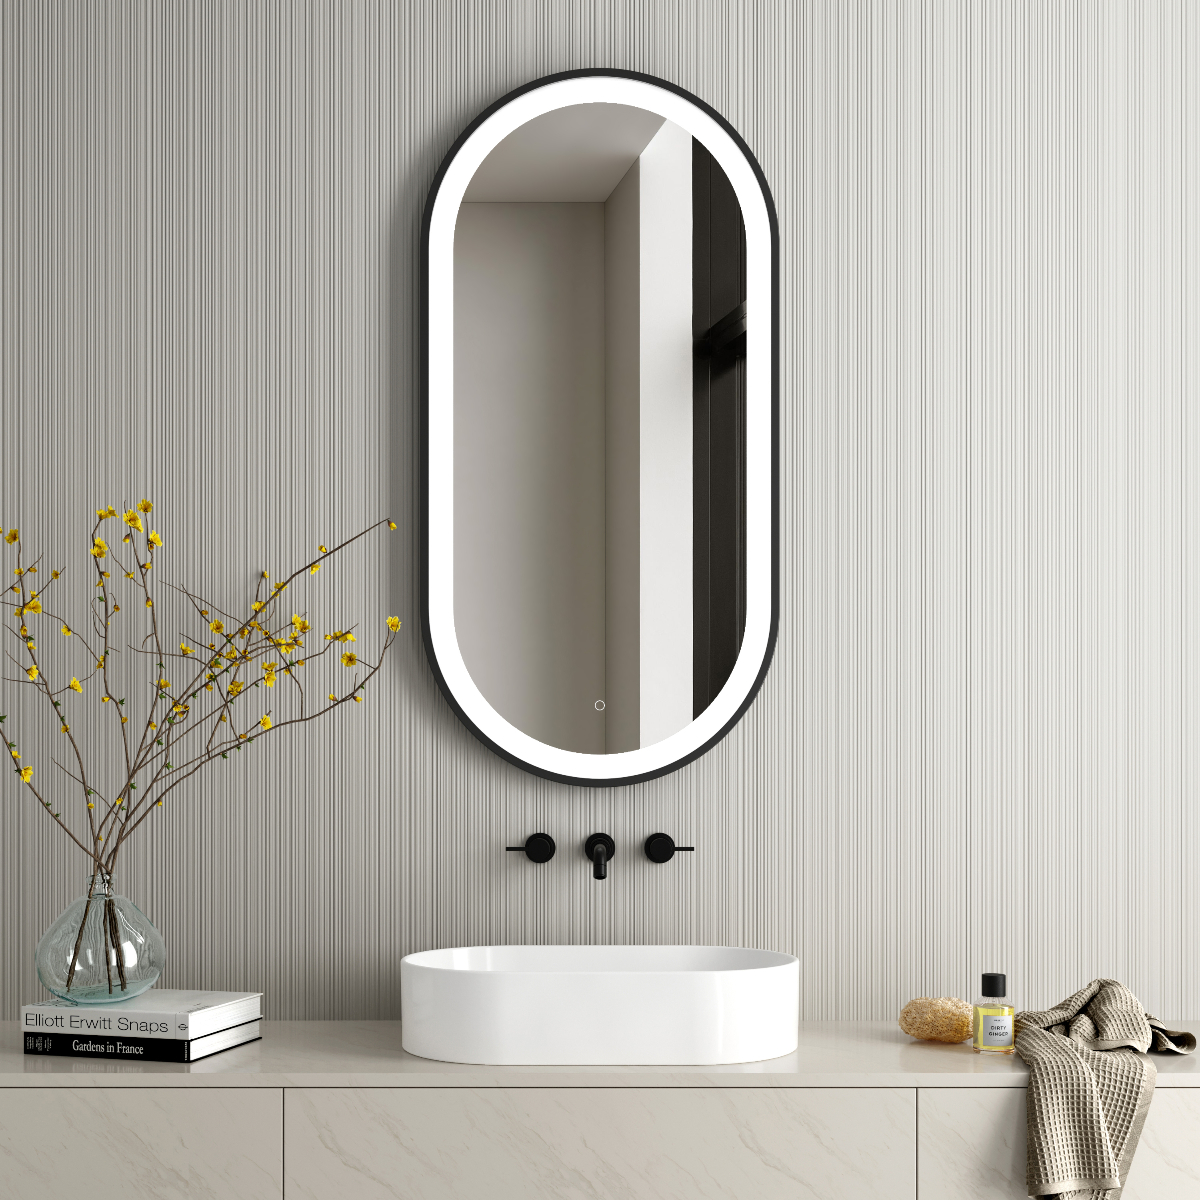 an illuminated round LED mirror in a guest bathroom with a white countertop basin, matt black hardware, beige cabinetry and accessories